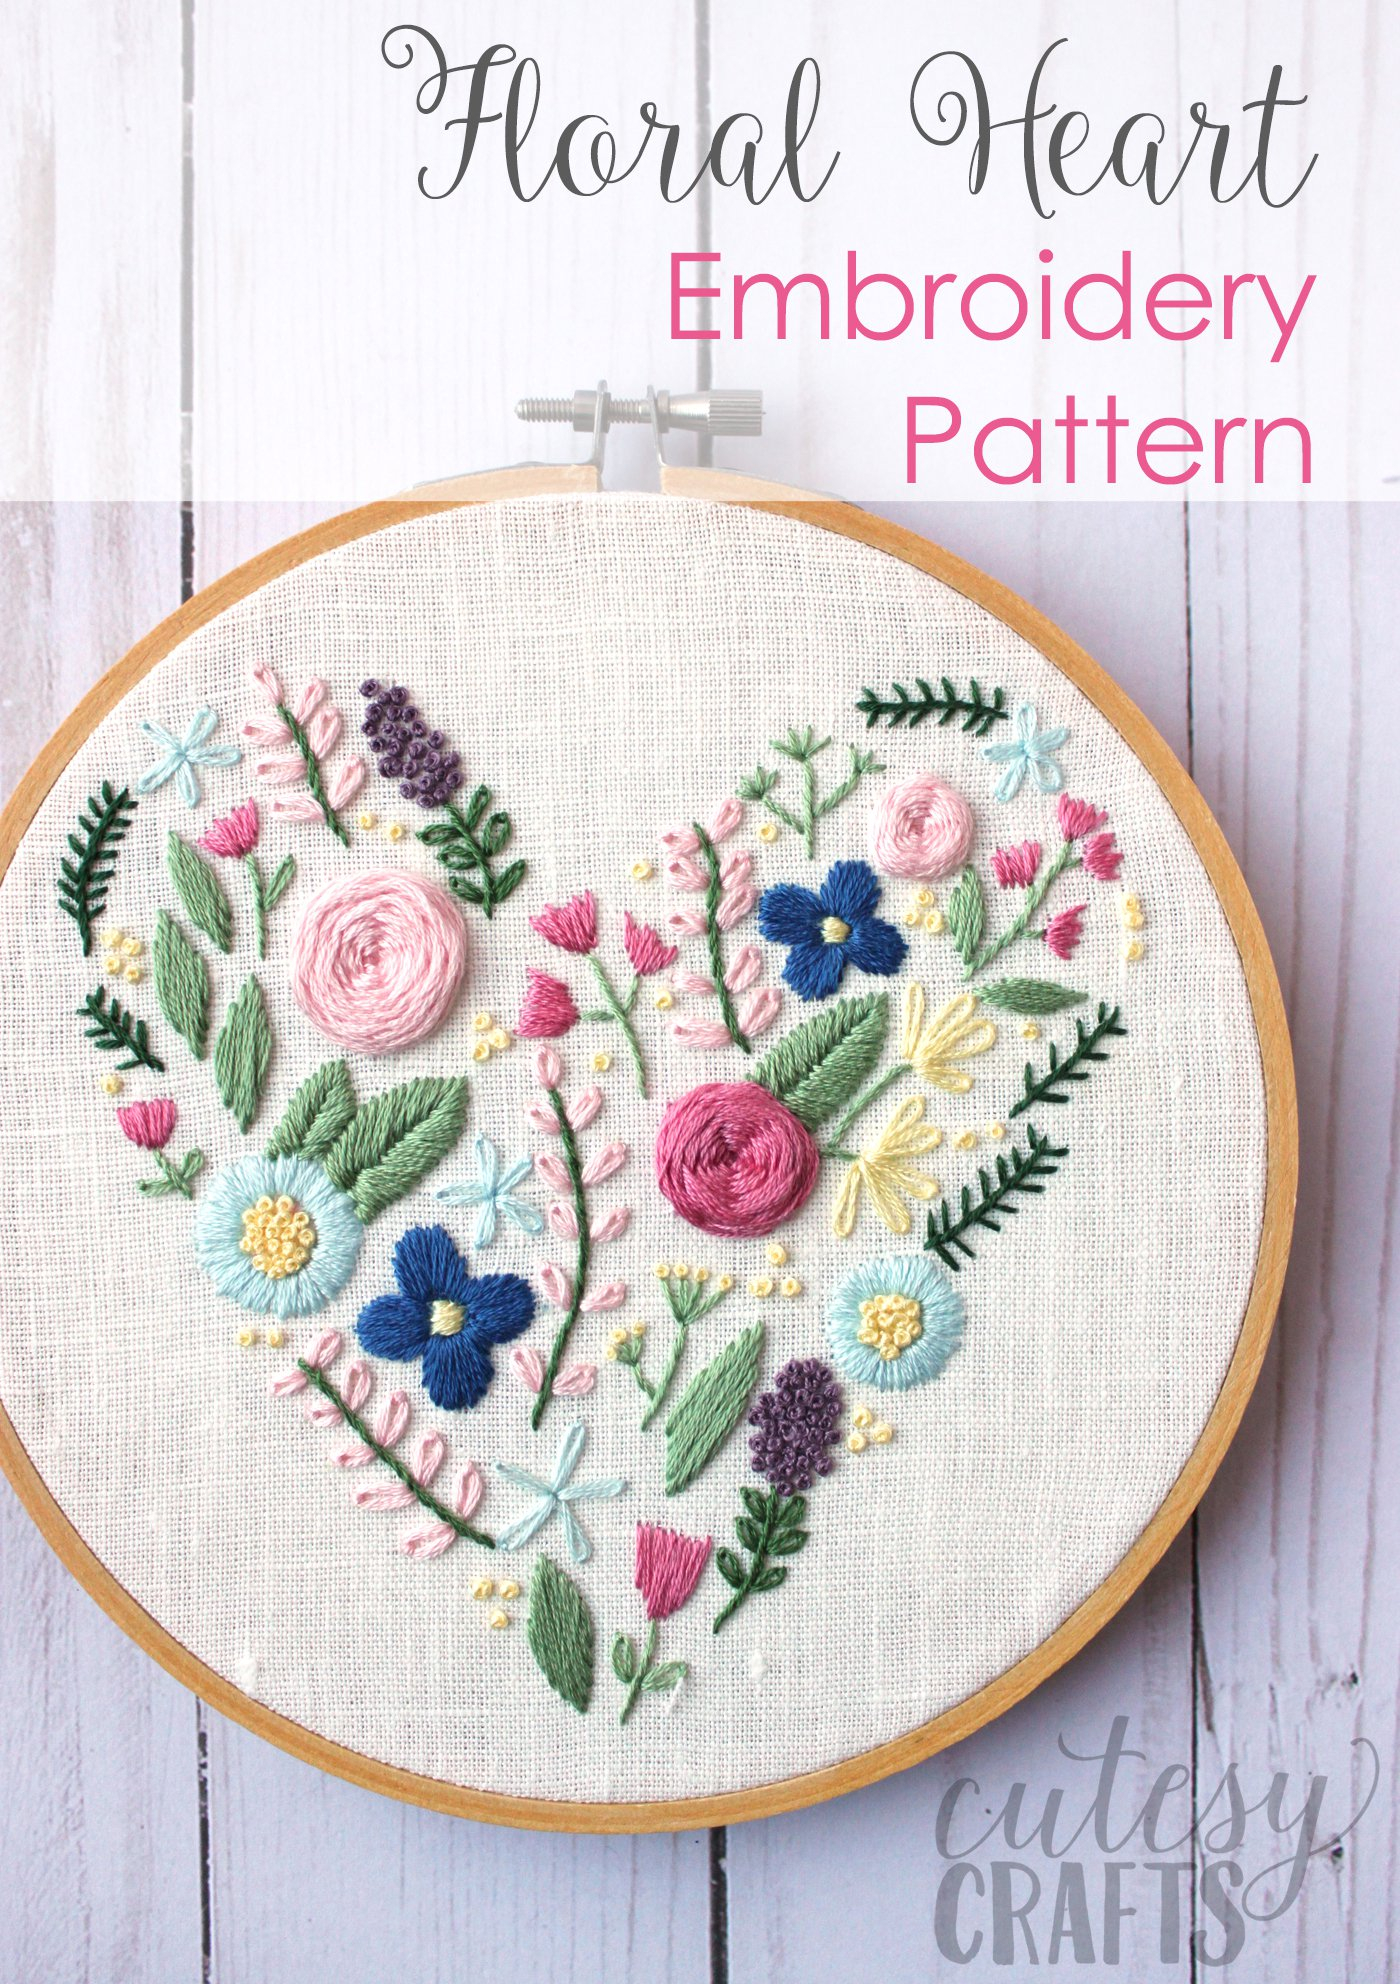 Free Embroidery Pattern Floral Heart Hand Embroidery Pattern The Polka Dot Chair